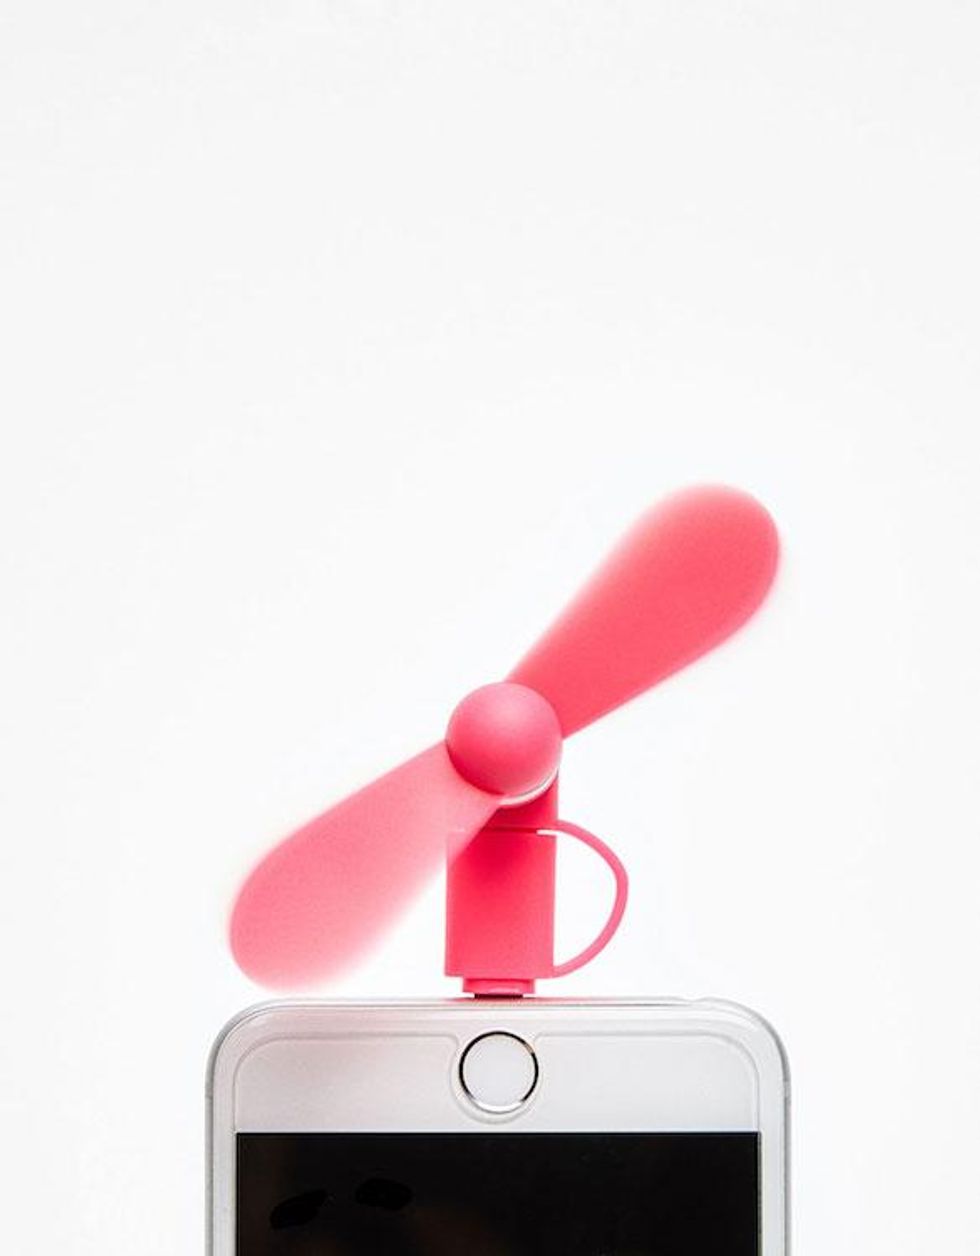 Bershka Fan for iPhone/Android